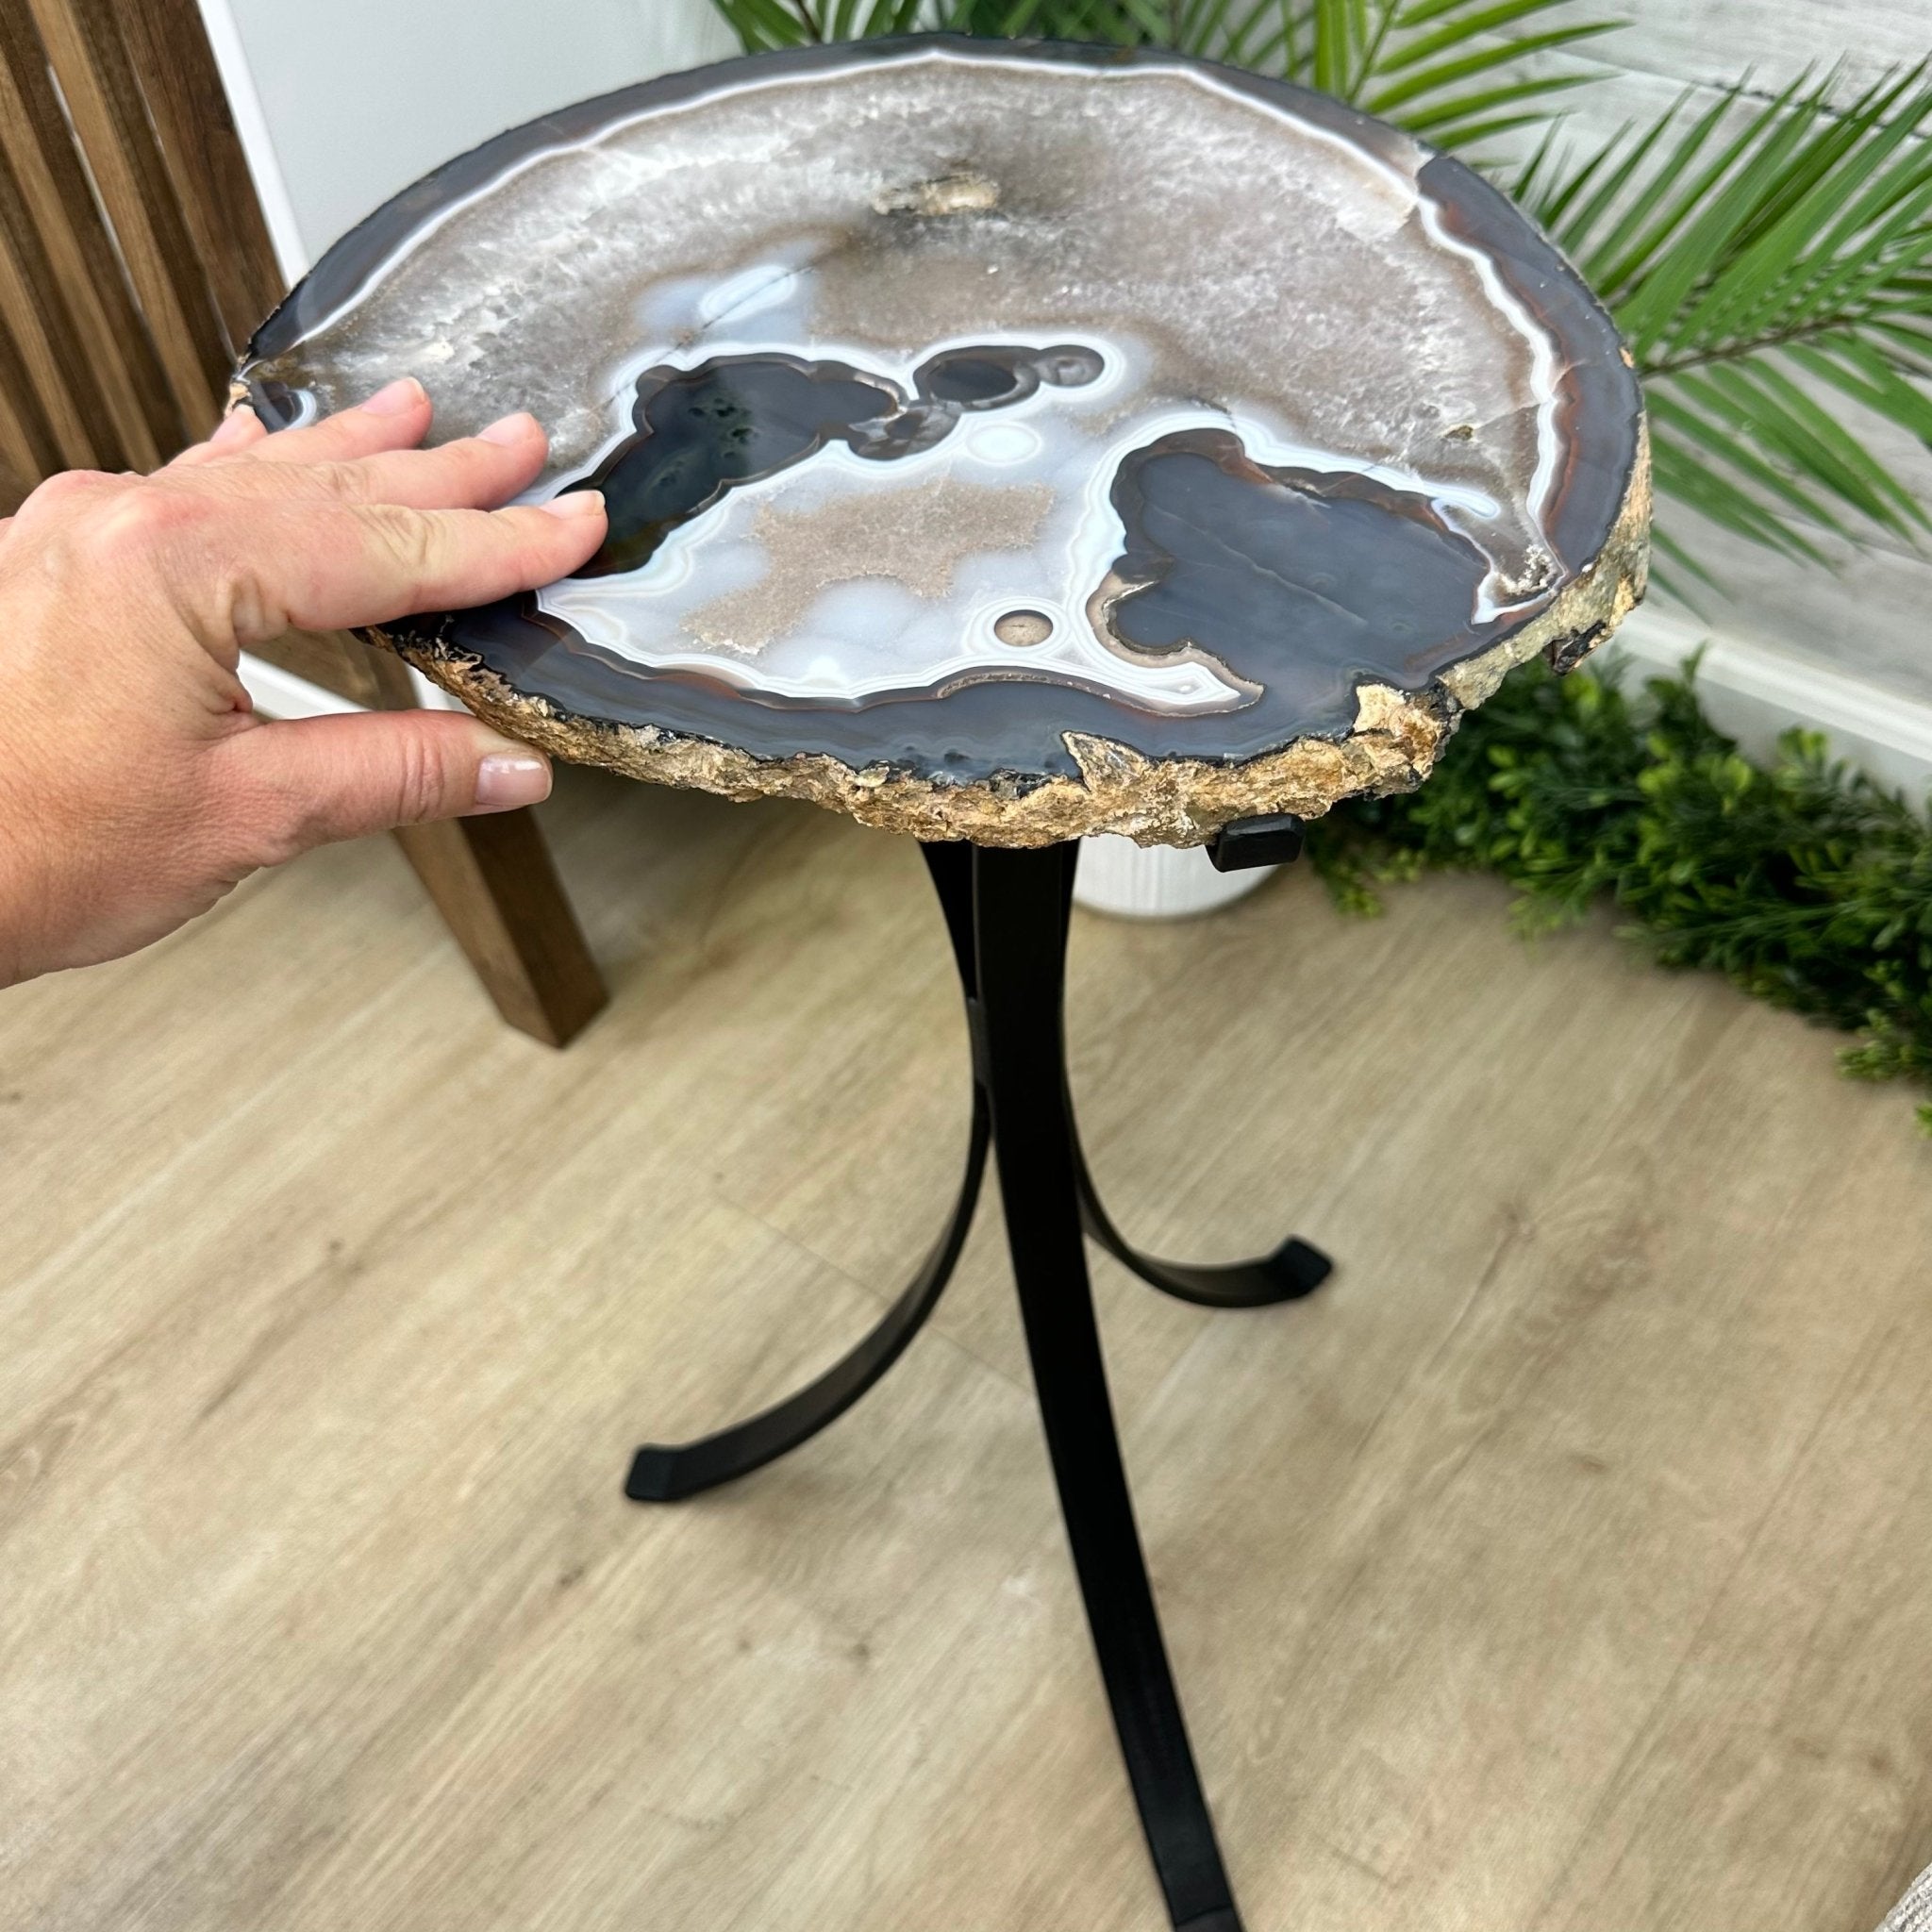 Natural Brazilian Agate Side Table on a black metal base, 22.25" tall #1305-0159 by Brazil Gems - Brazil GemsBrazil GemsNatural Brazilian Agate Side Table on a black metal base, 22.25" tall #1305-0159 by Brazil GemsTables: Side1305-0159